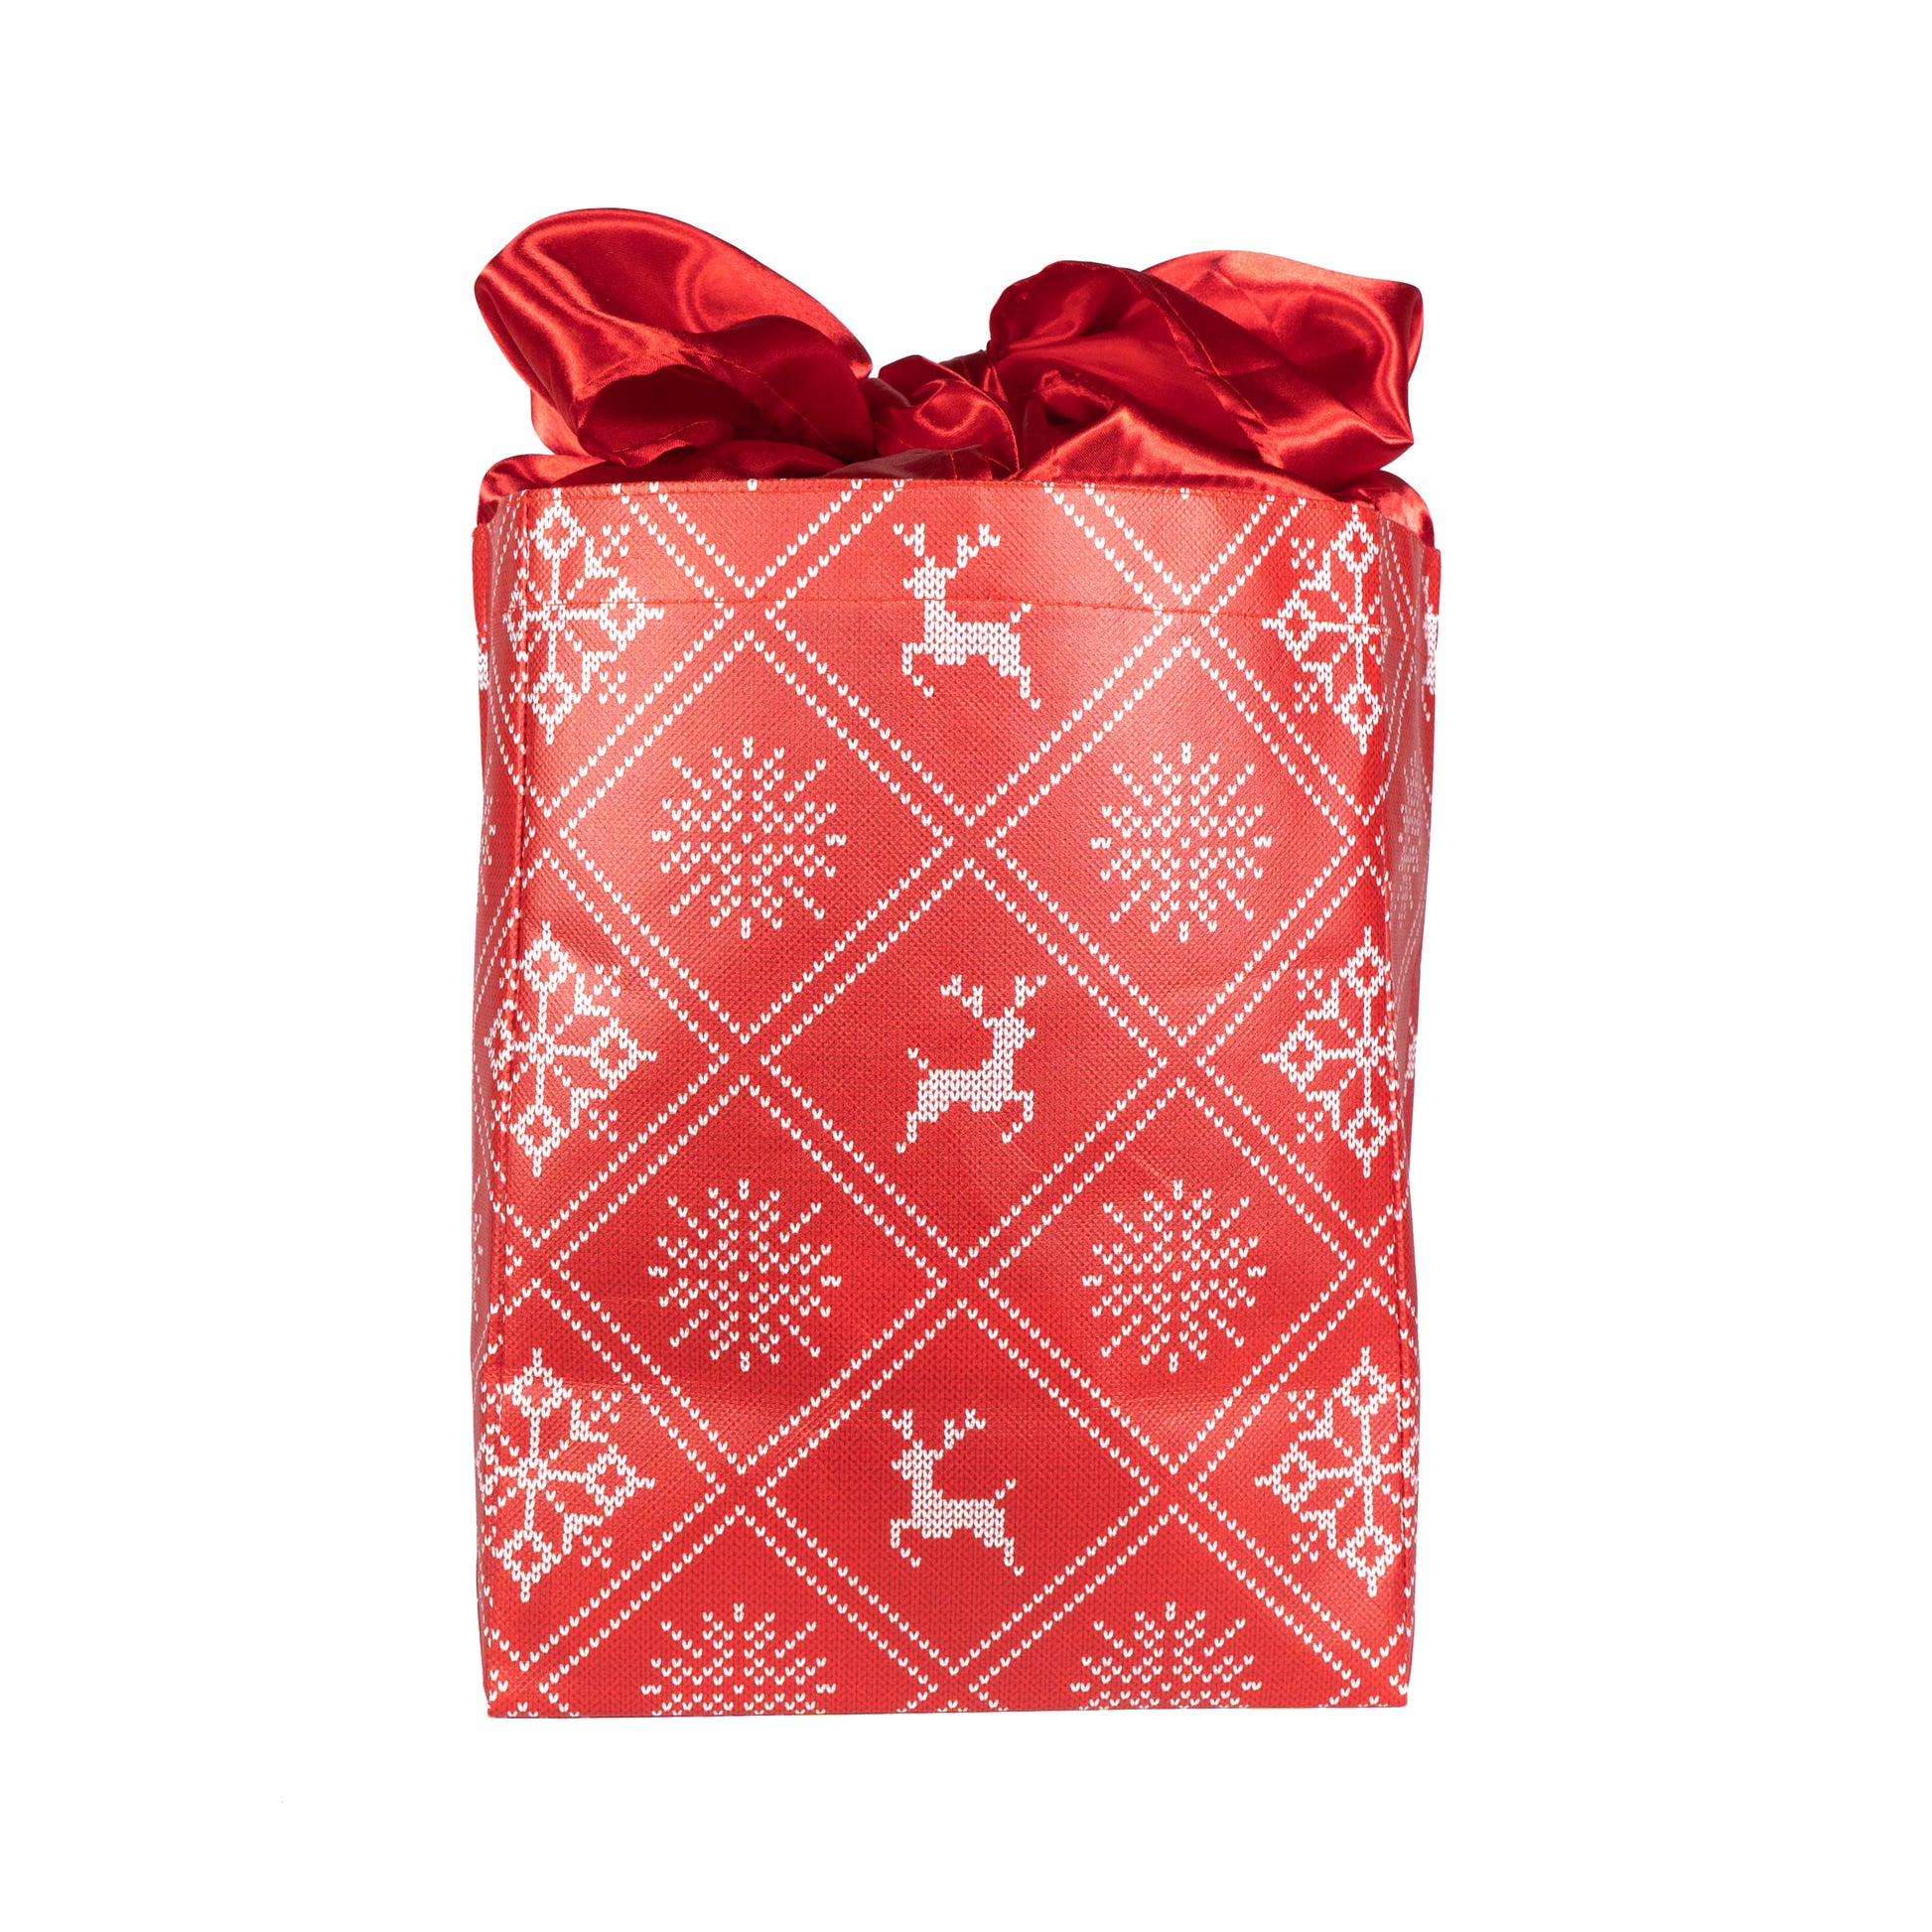 IRREGULAR - Holiday Red with Wintry Knitted Sweater Design fold, store, and reseal with our reusable gift bag, satin closure makes for an eco-friendly gift bag - EverWrap